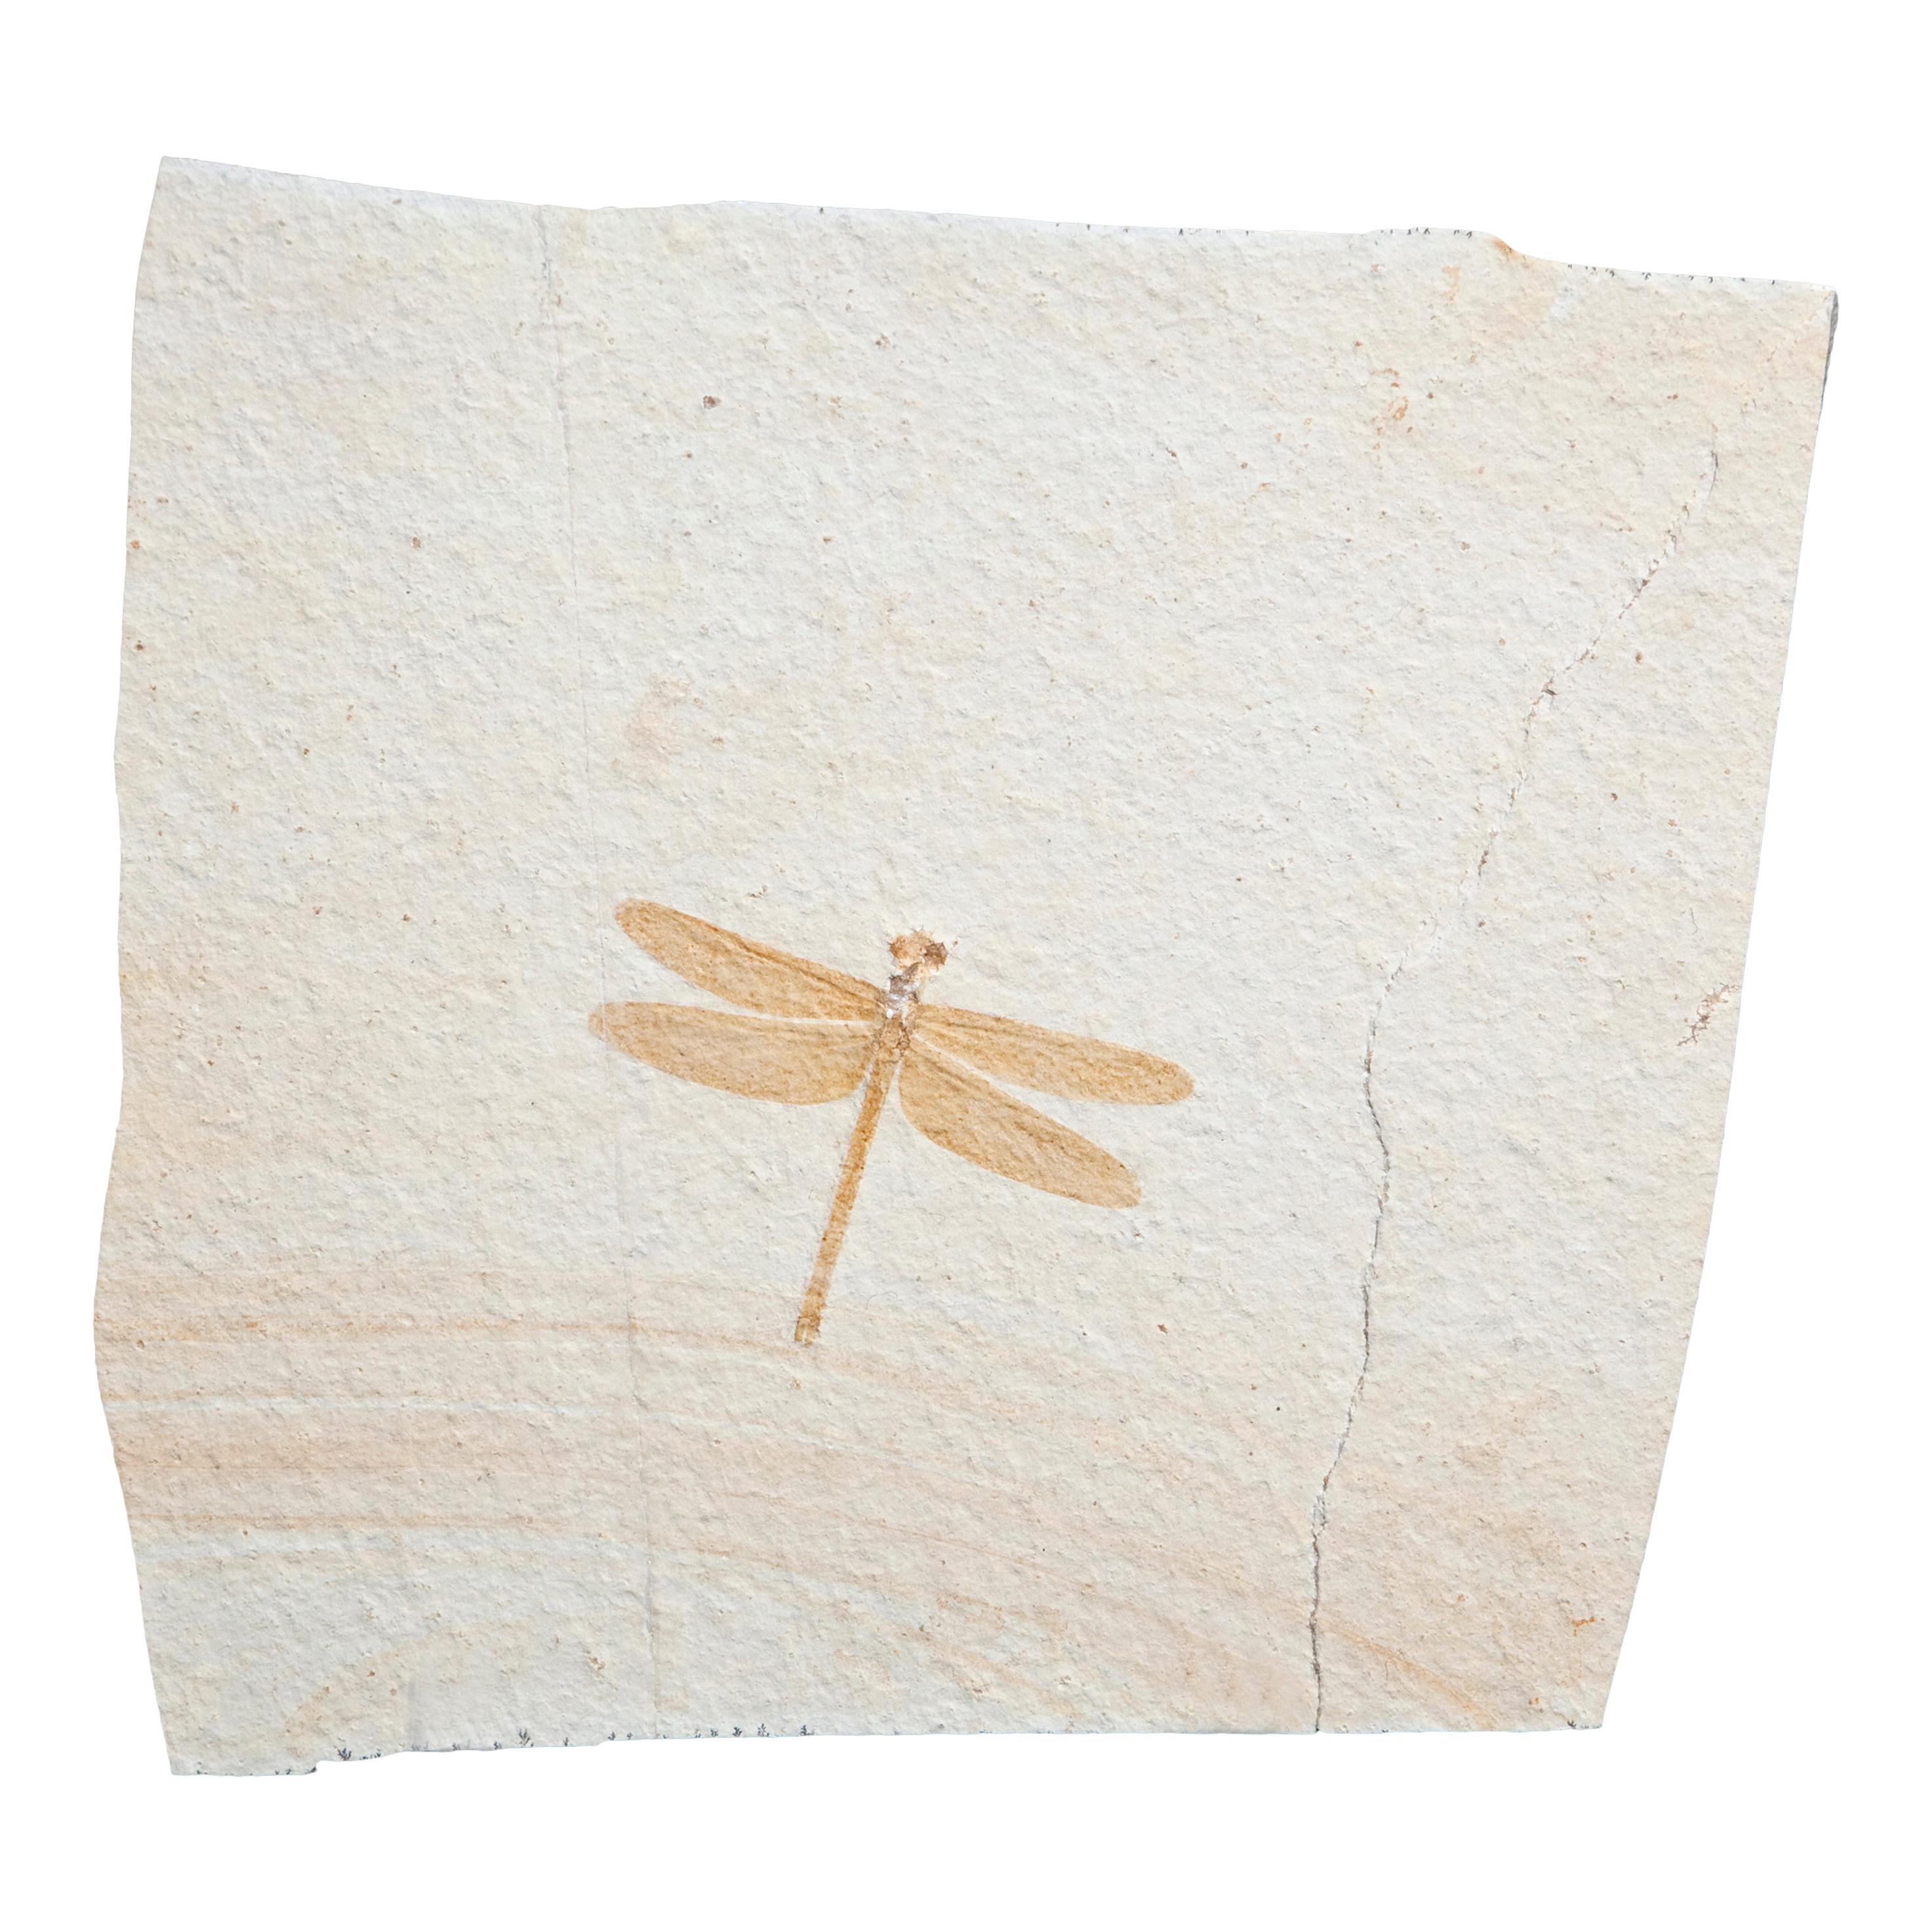 Fossil Dragonfly Dating 150 Million Years Old For Sale